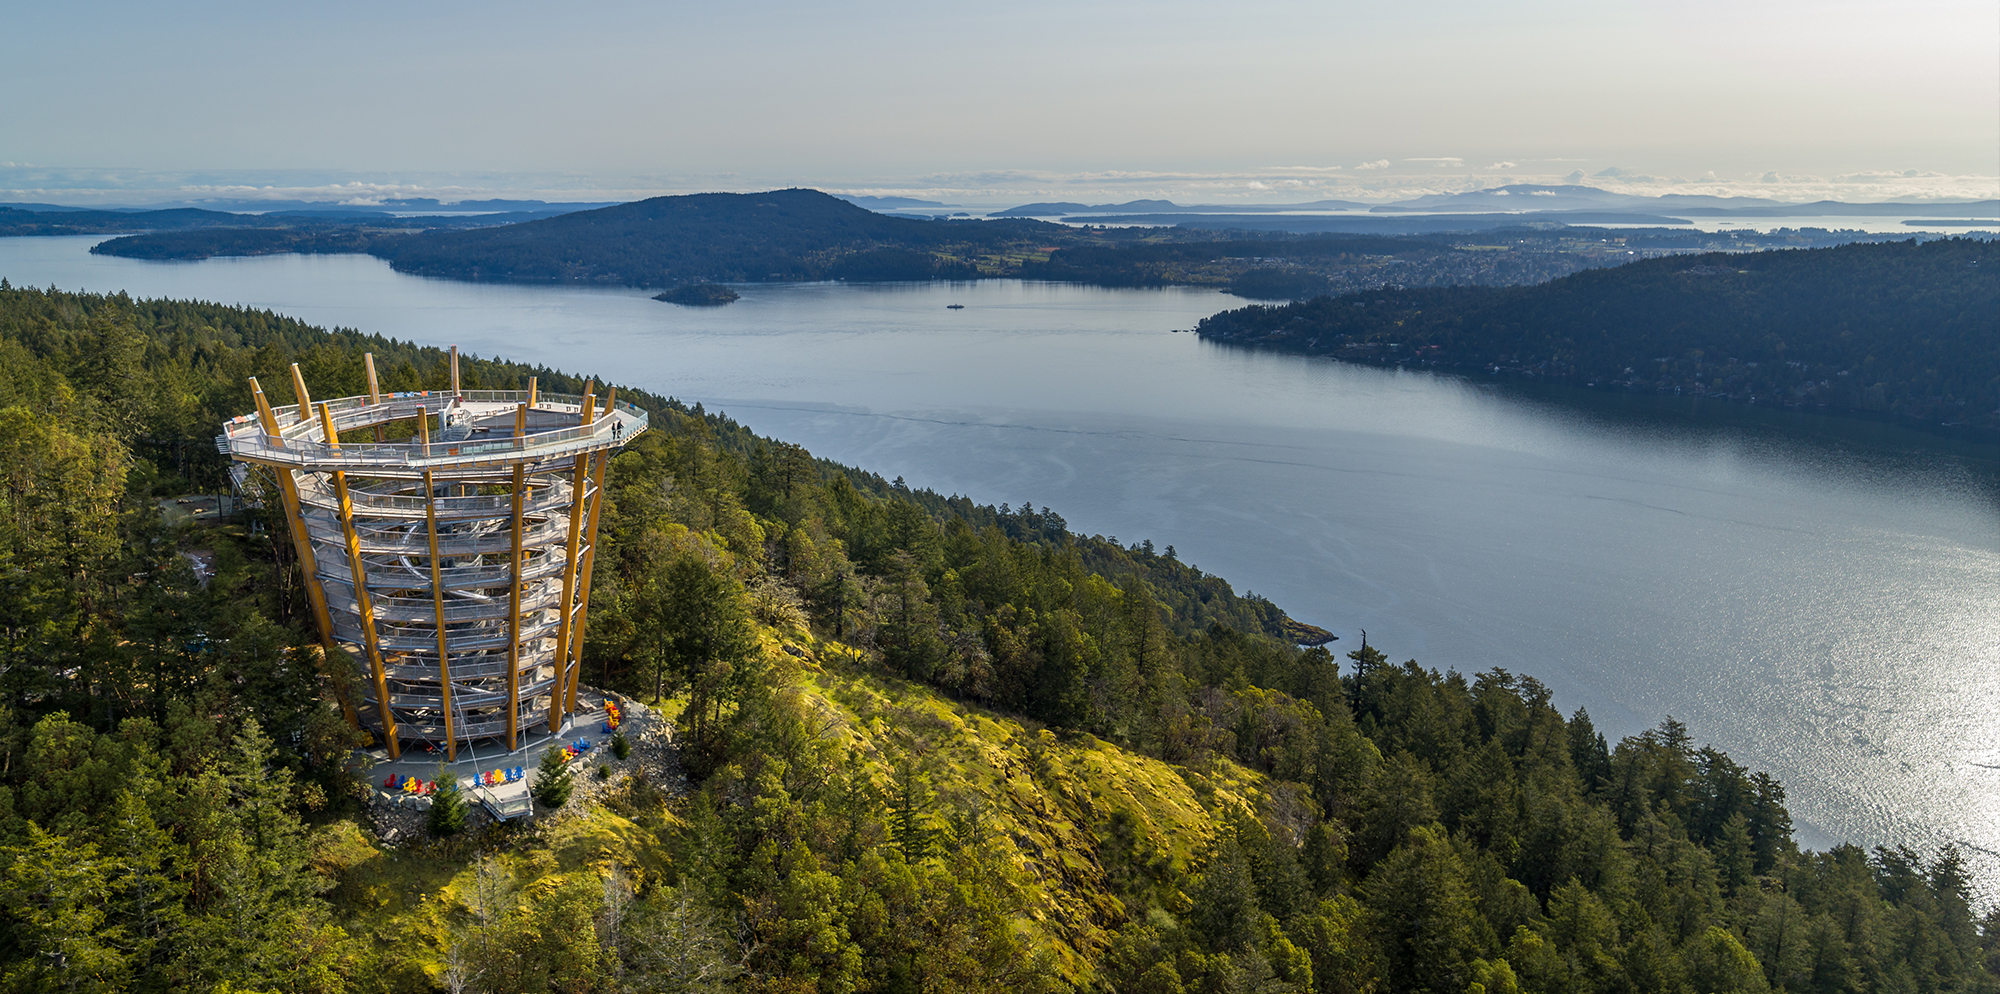 top things to do in victoria bc, best things to do in victoria bc, fun things to do in victoria bc, malahat skywalk, malahat skywalk victoria